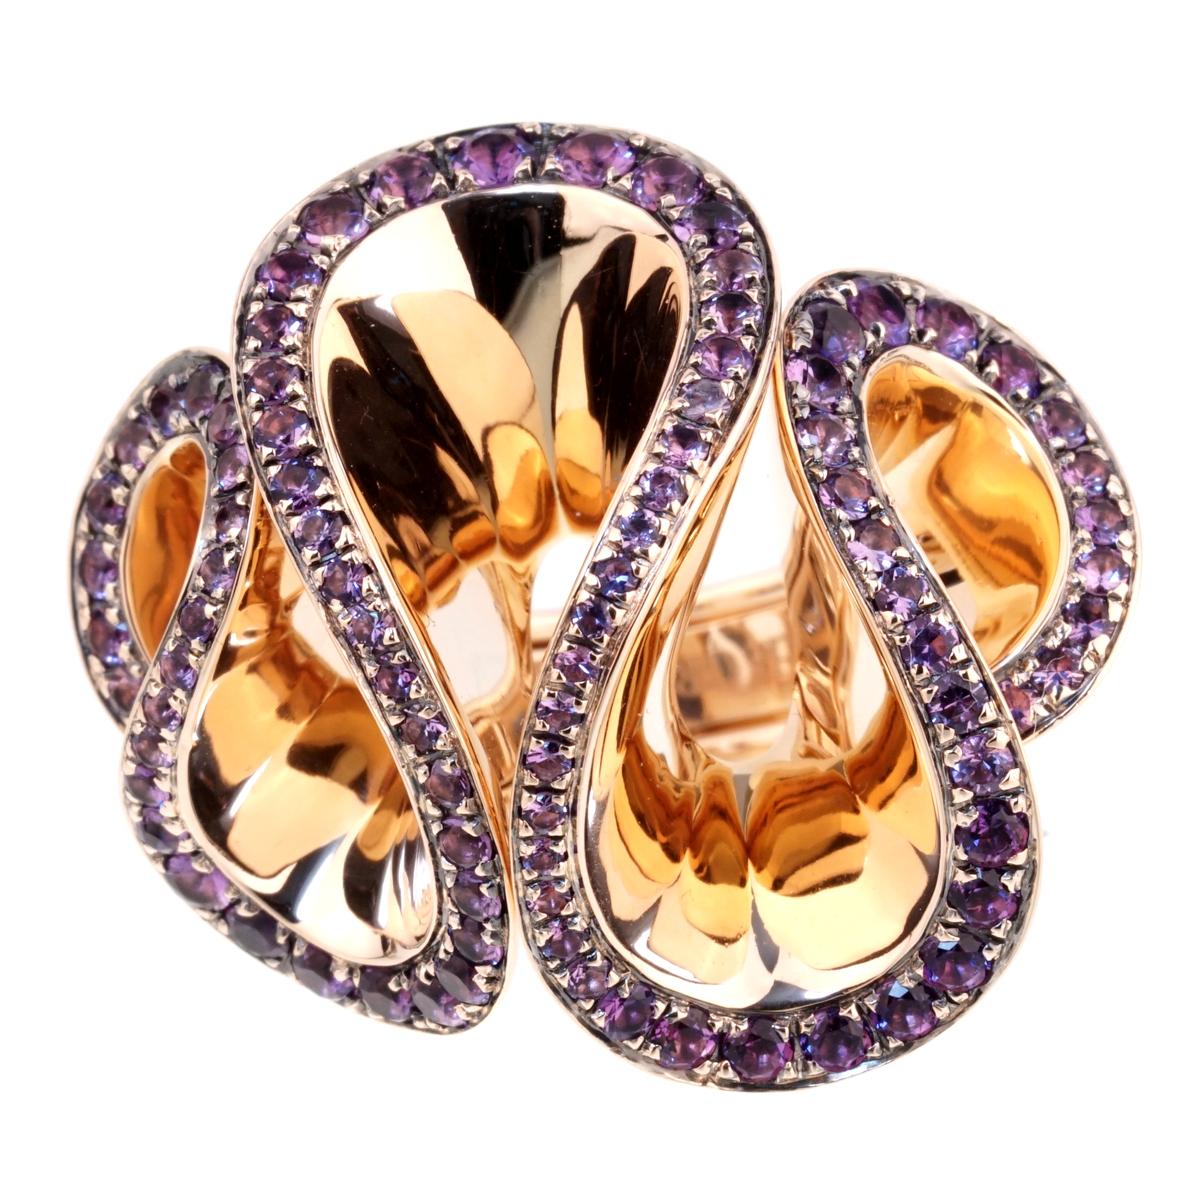 A magnificent De Grisogono Zigana ring featuring amethyst stones set in 18k rose gold.

Size: 6 1/4 Resizeable